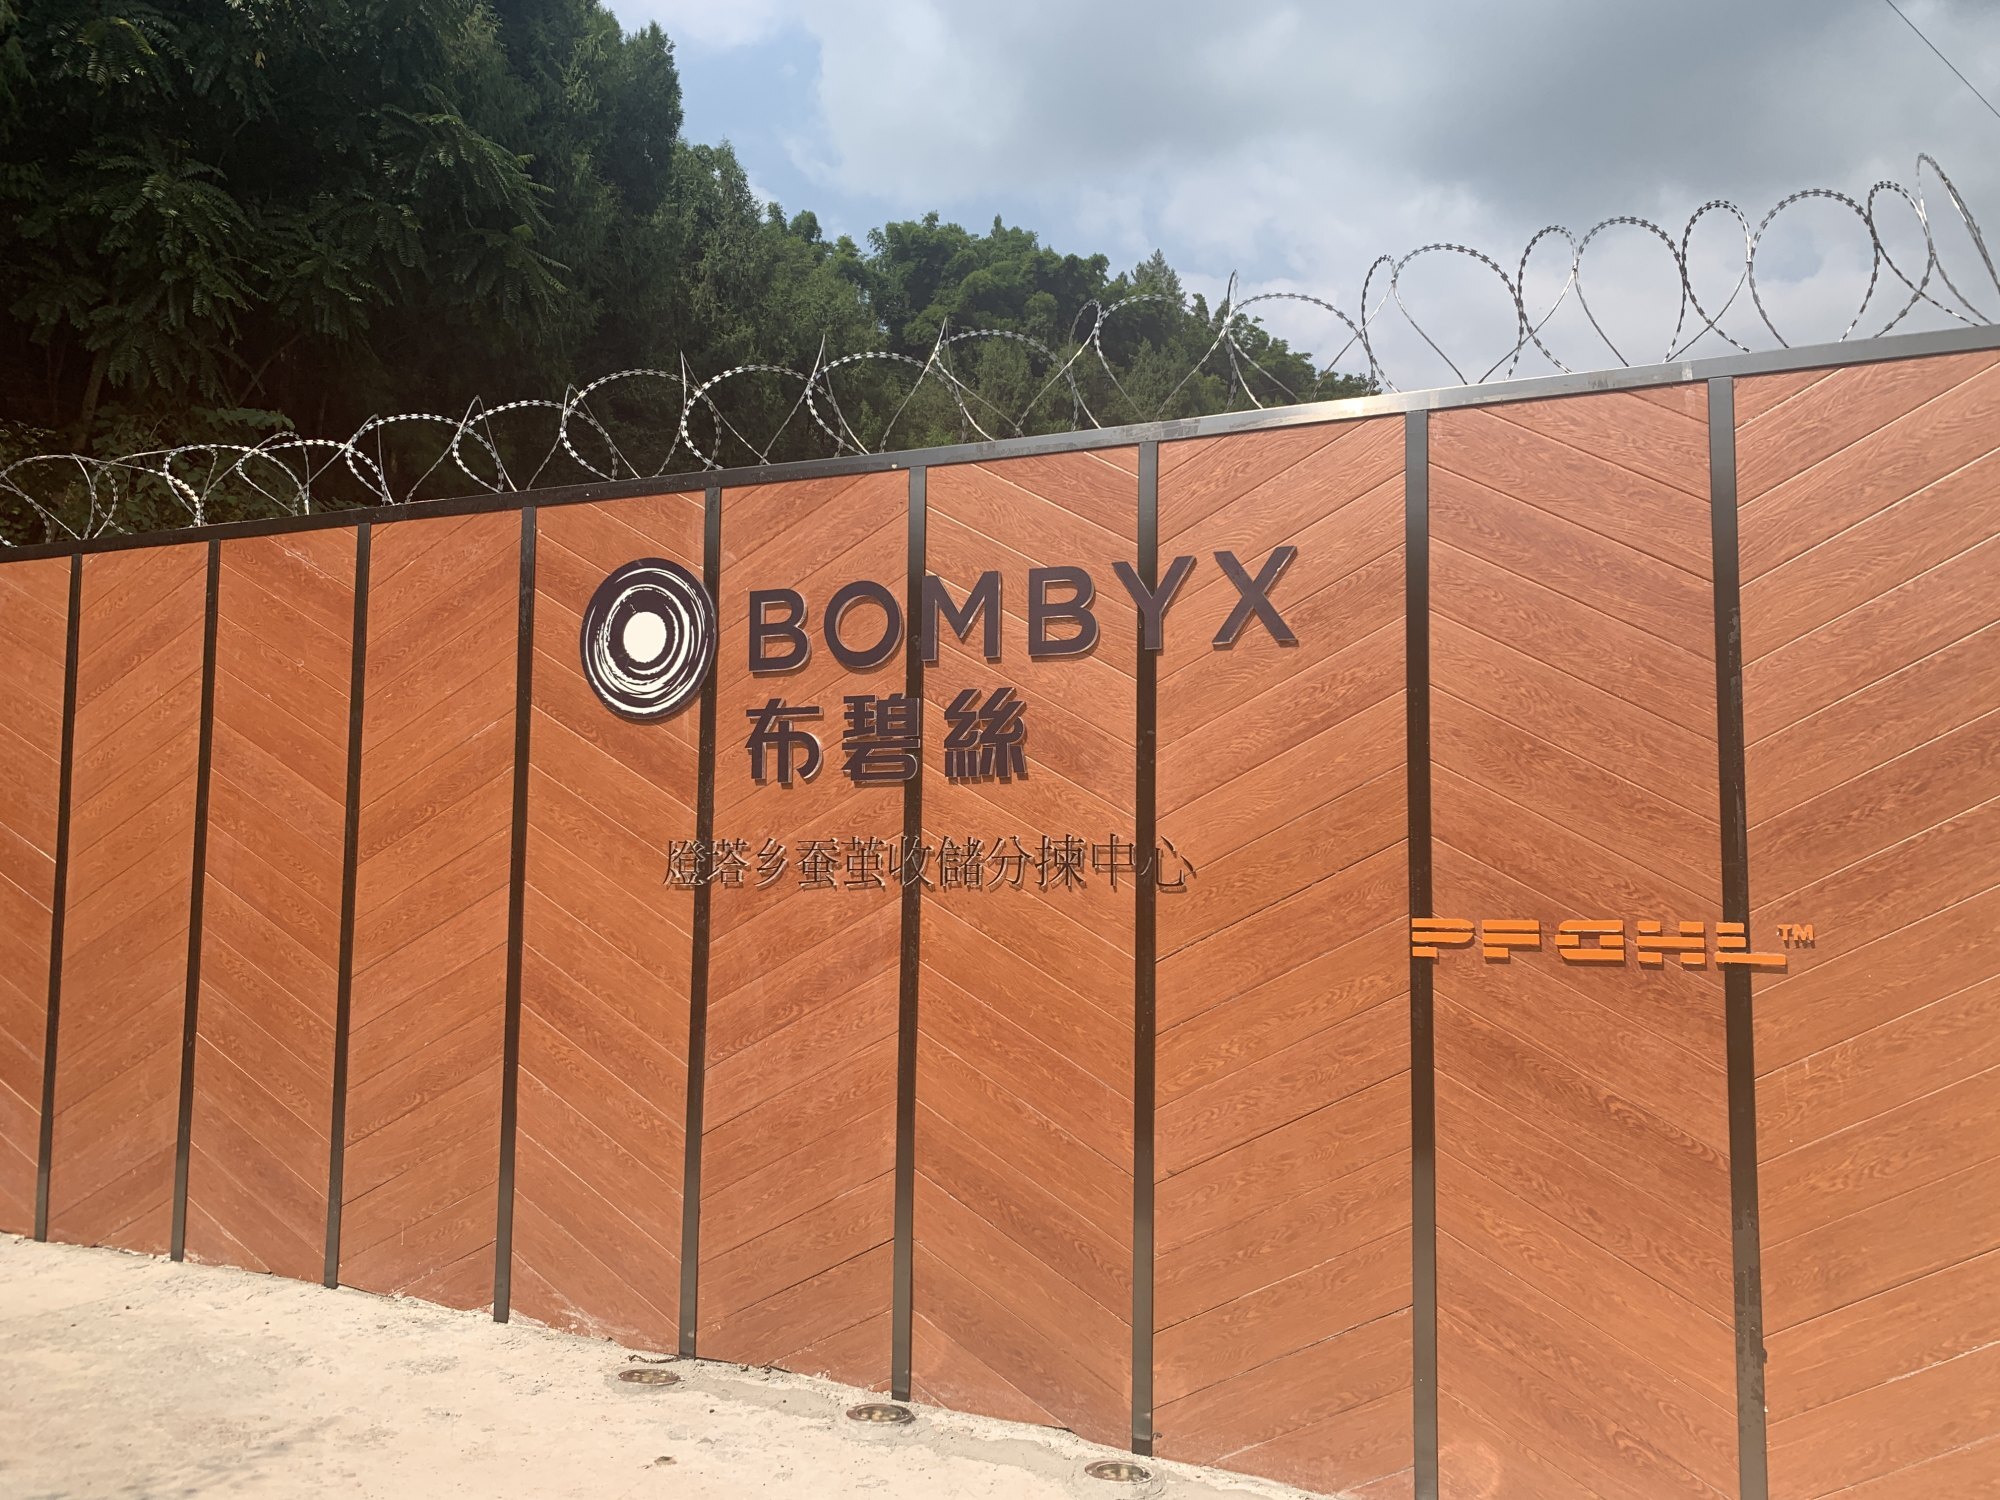 The Bombyx factory in China. The move into silk production in Sichuan was a natural extension of a reverse journey for Andrew.